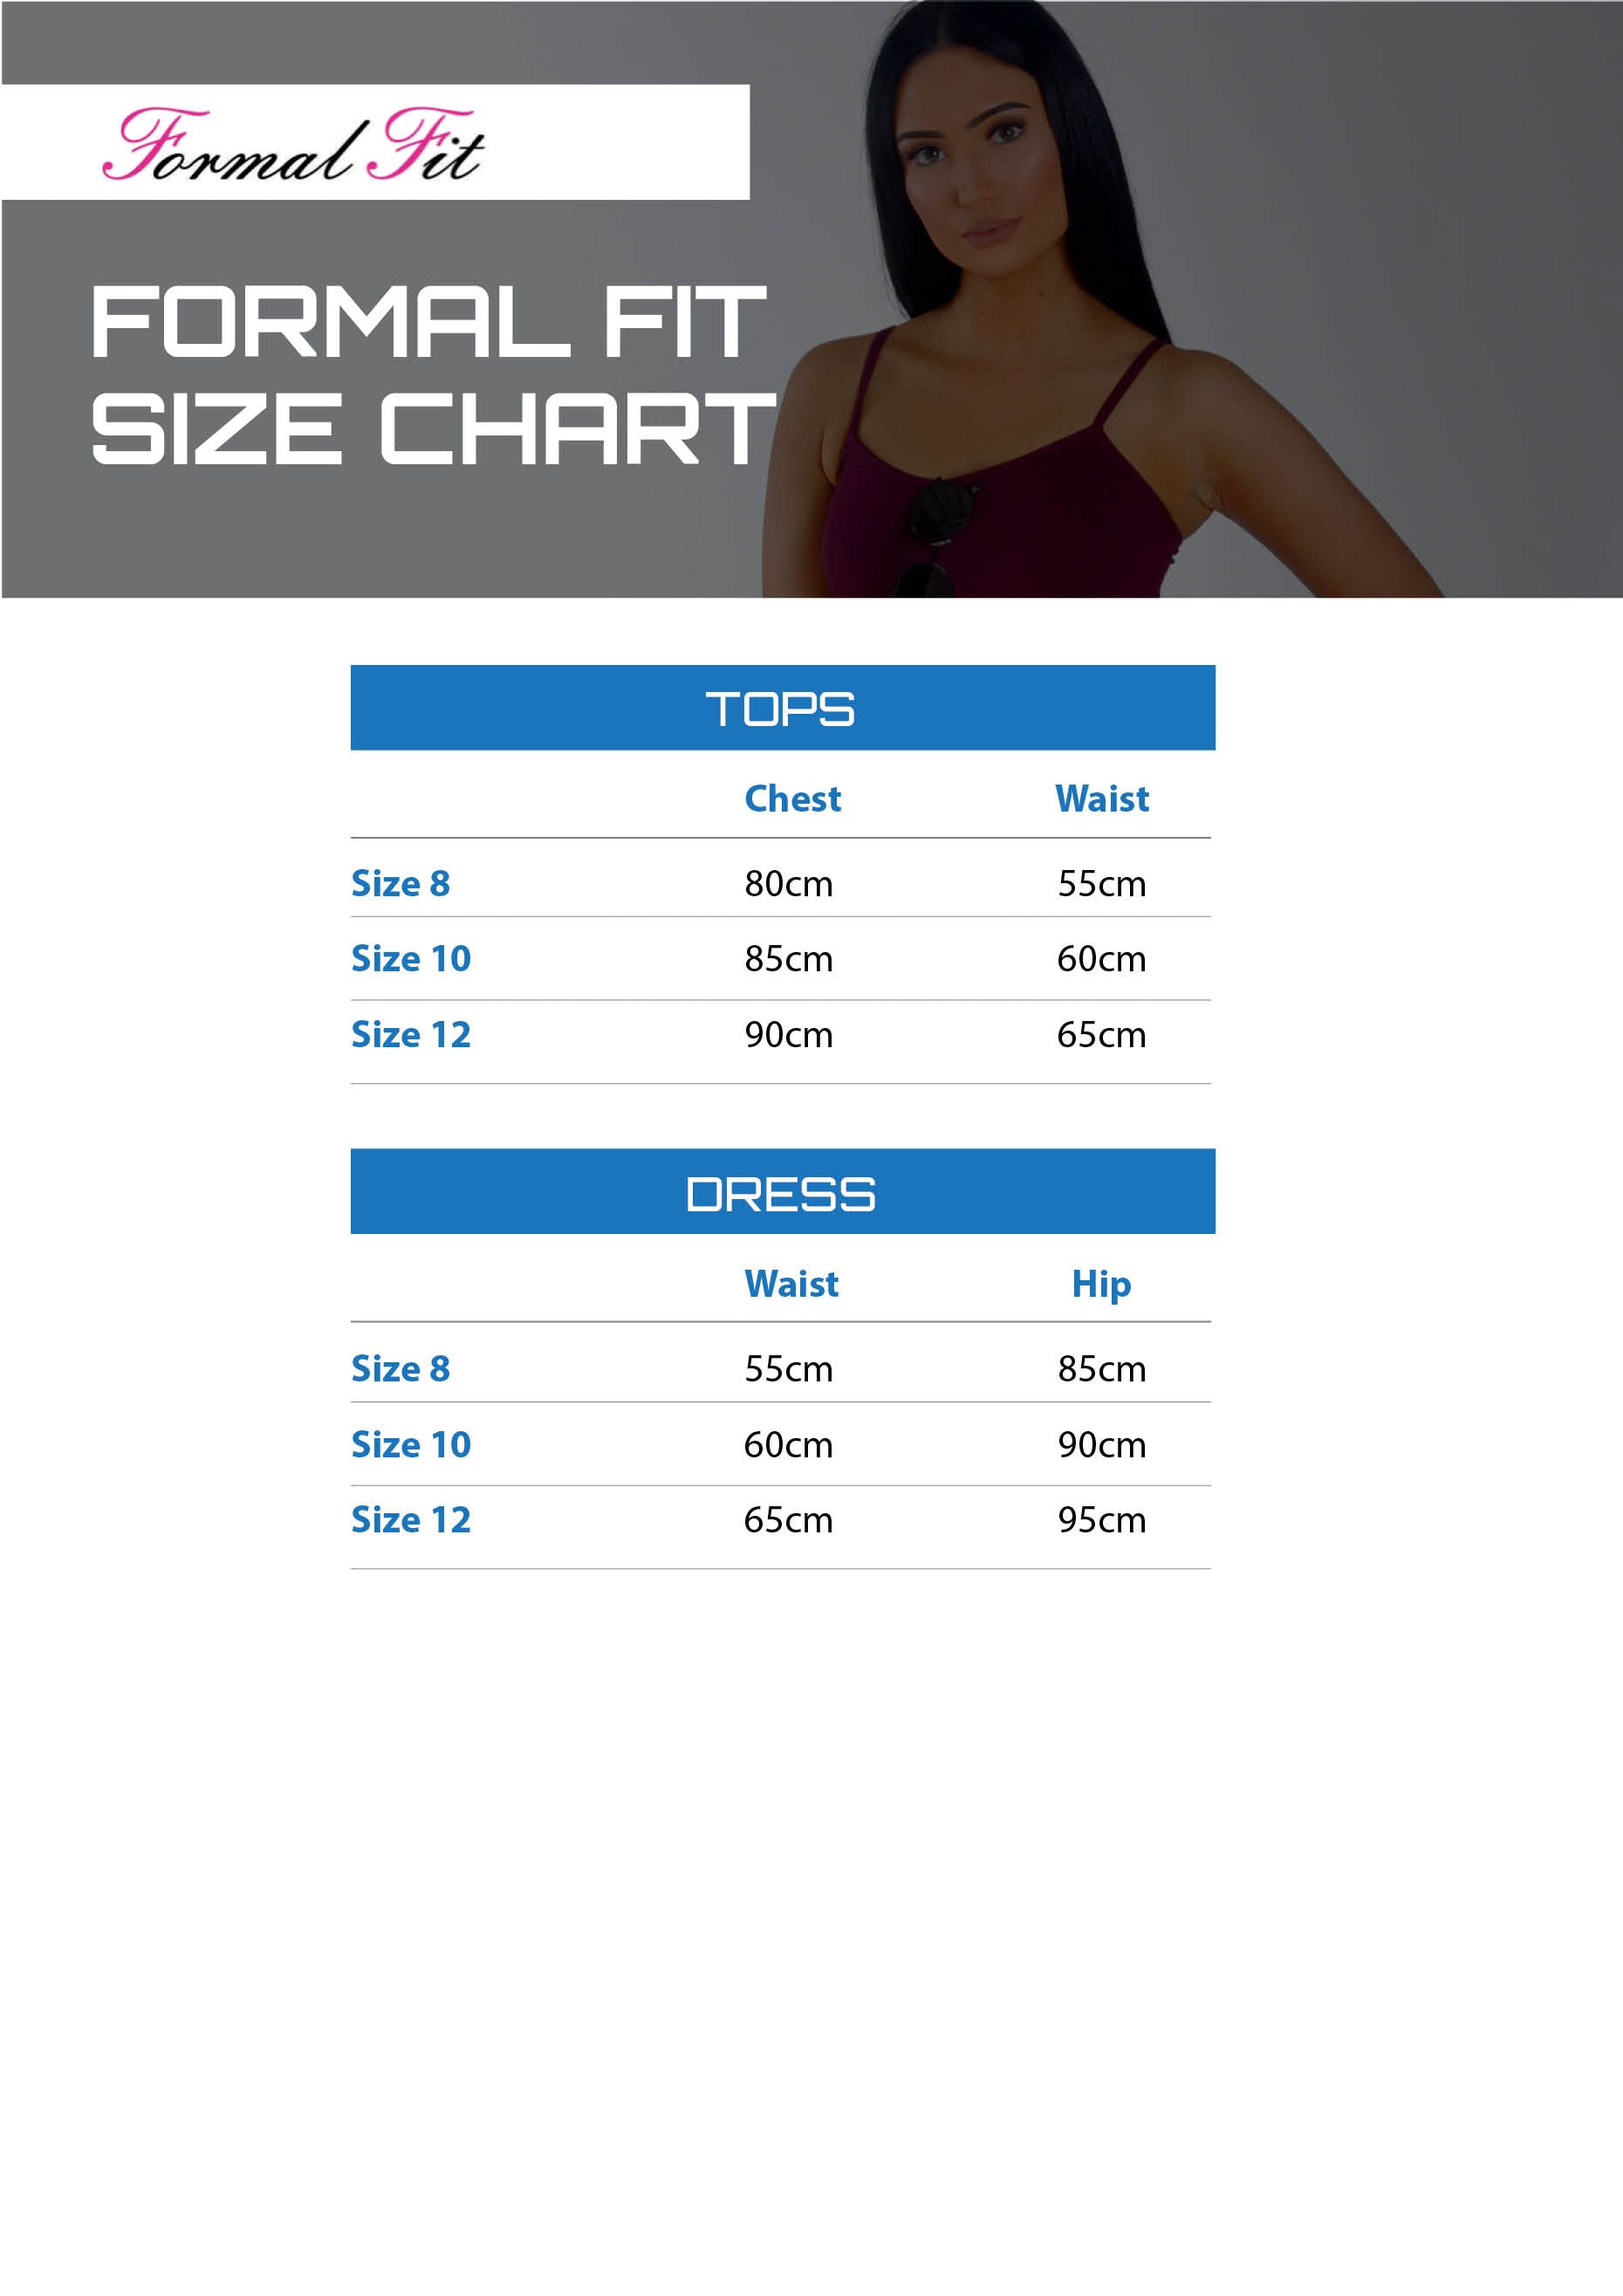 Formal Fit Size Chart